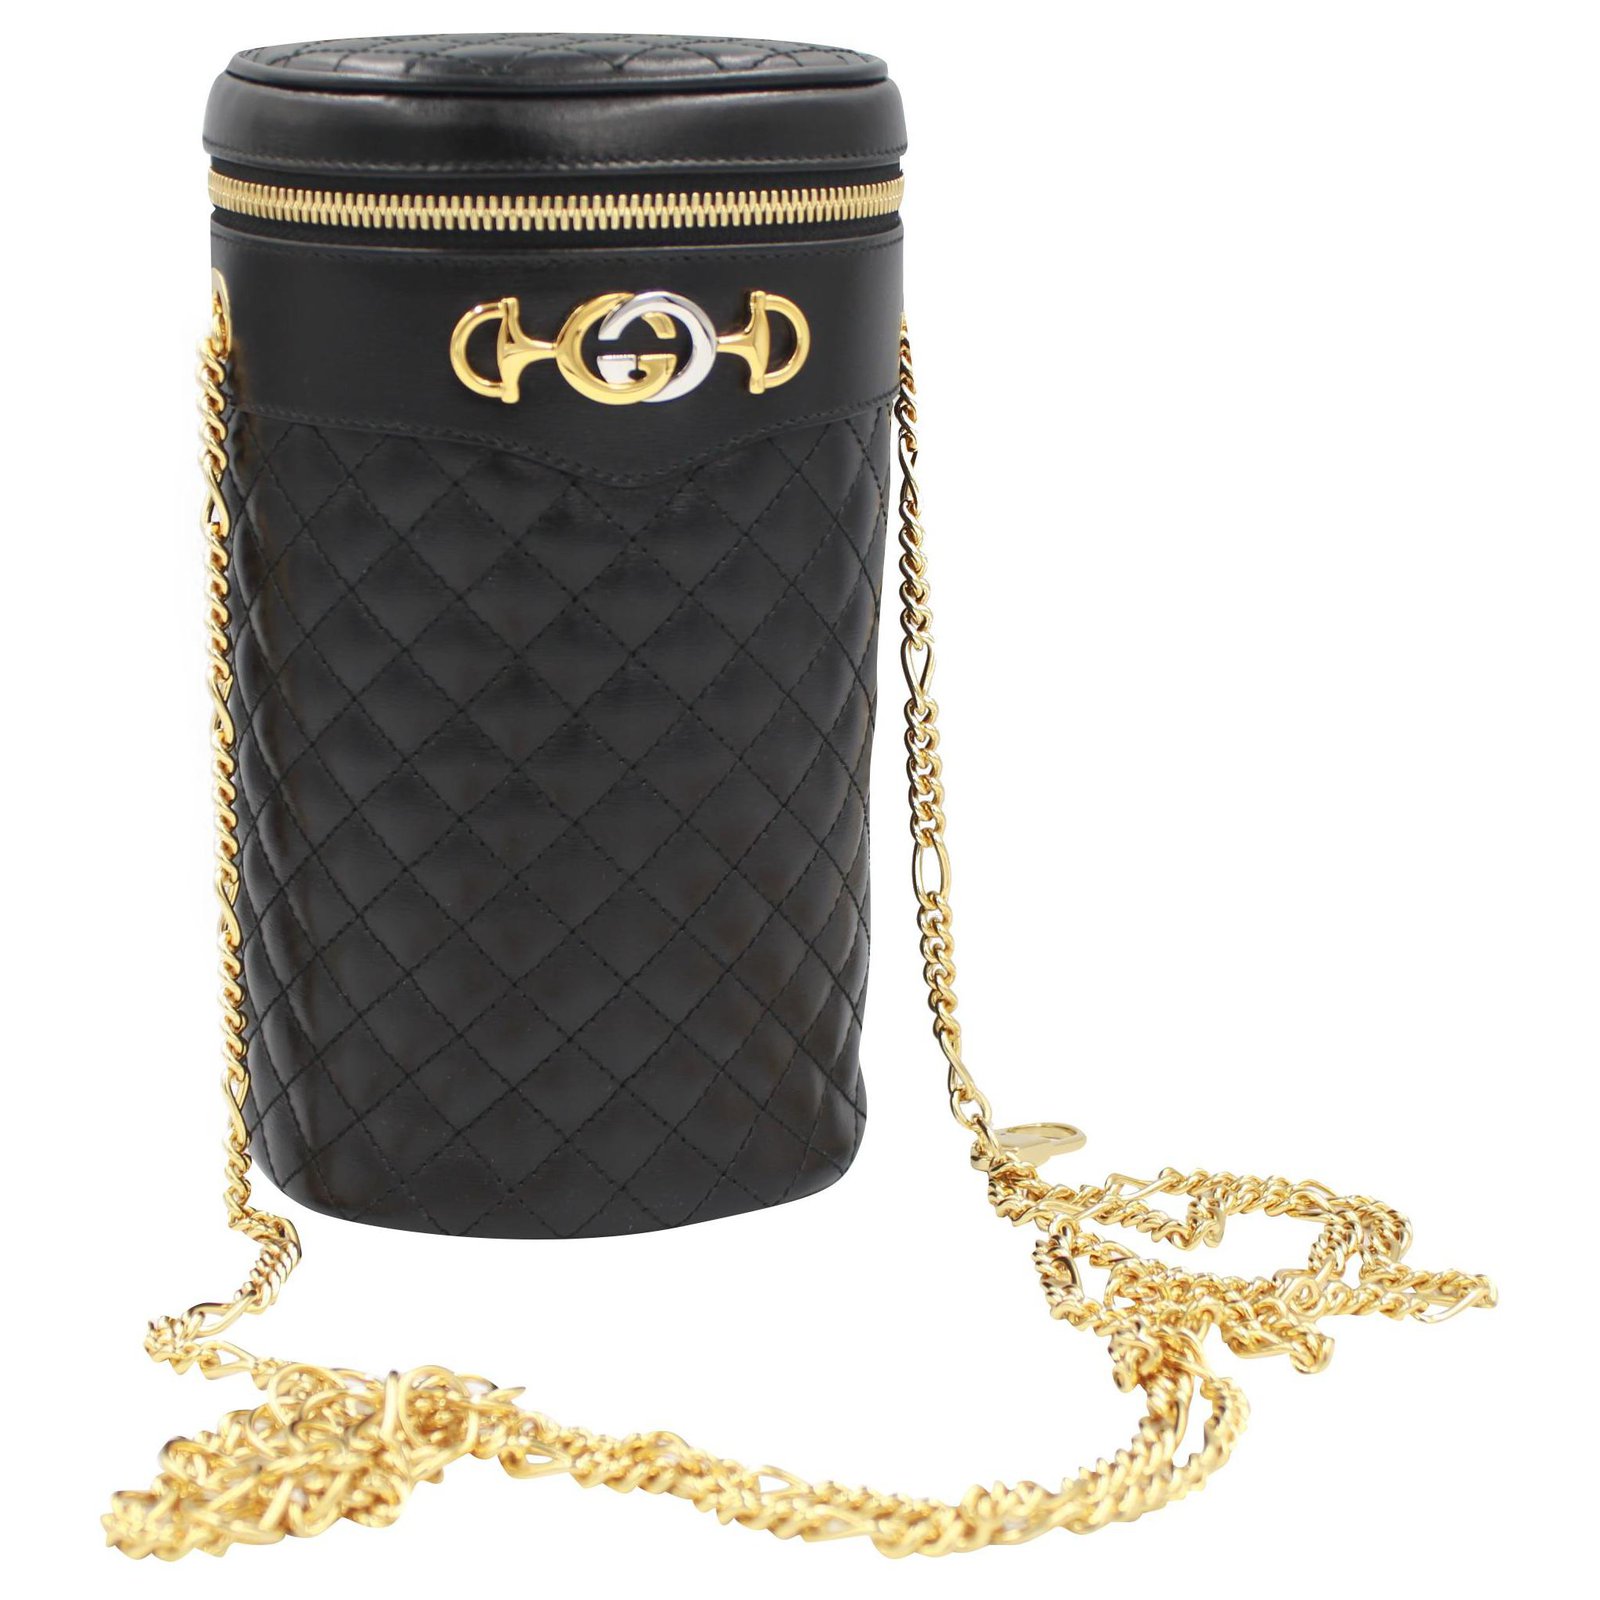 black gucci bag with gold chain